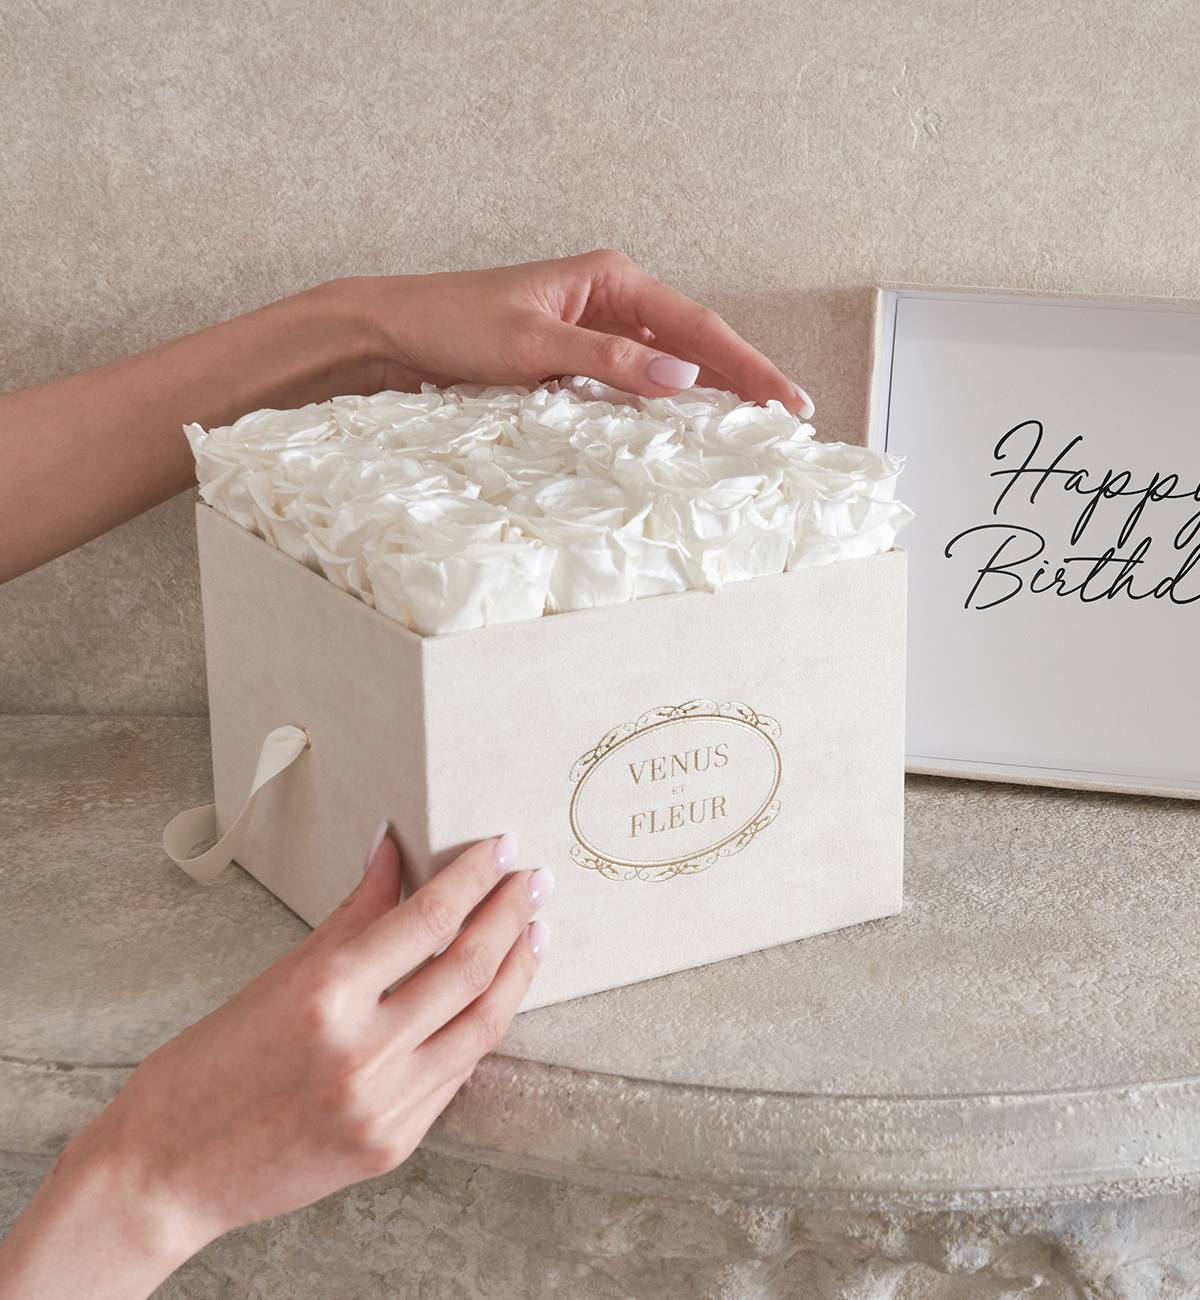 Hands reaching out, touching a white Venus et Fleur birthday gift box filled with white roses